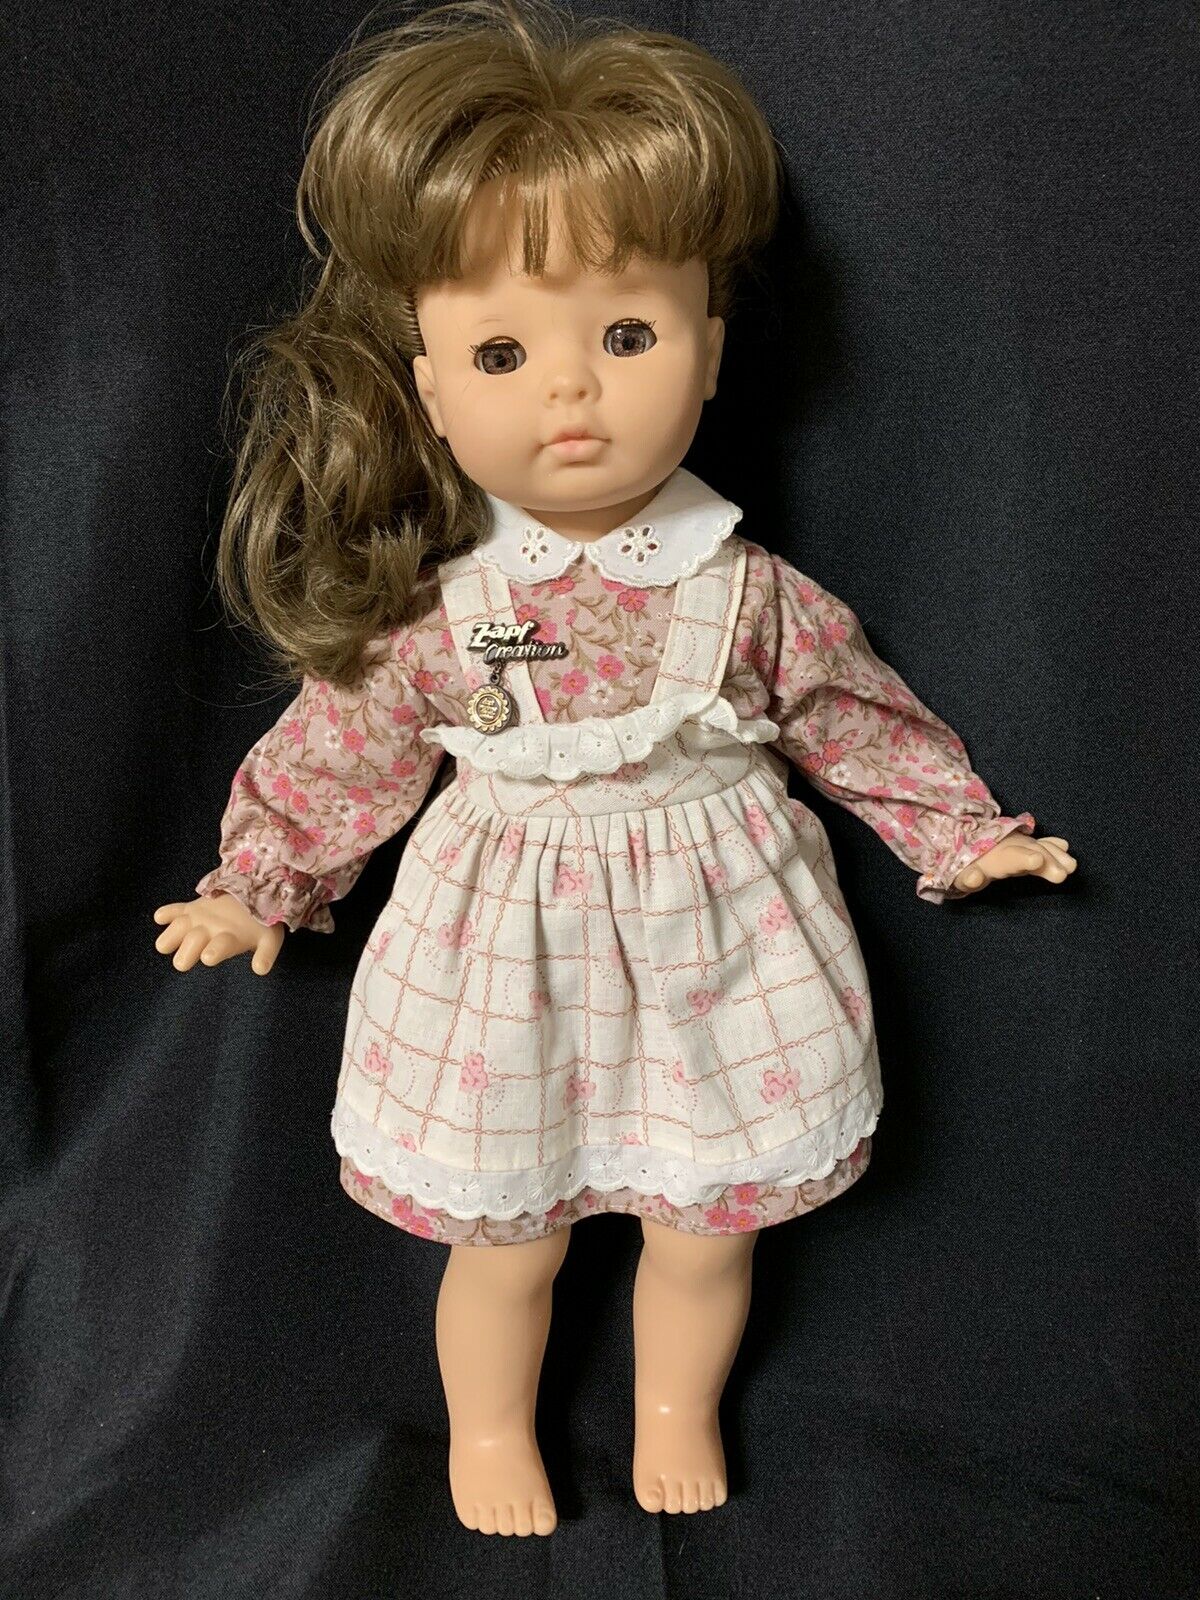 Zapf Creation Doll Margie Weichpuppe Vintage 19" Rare Beautiful From Germany